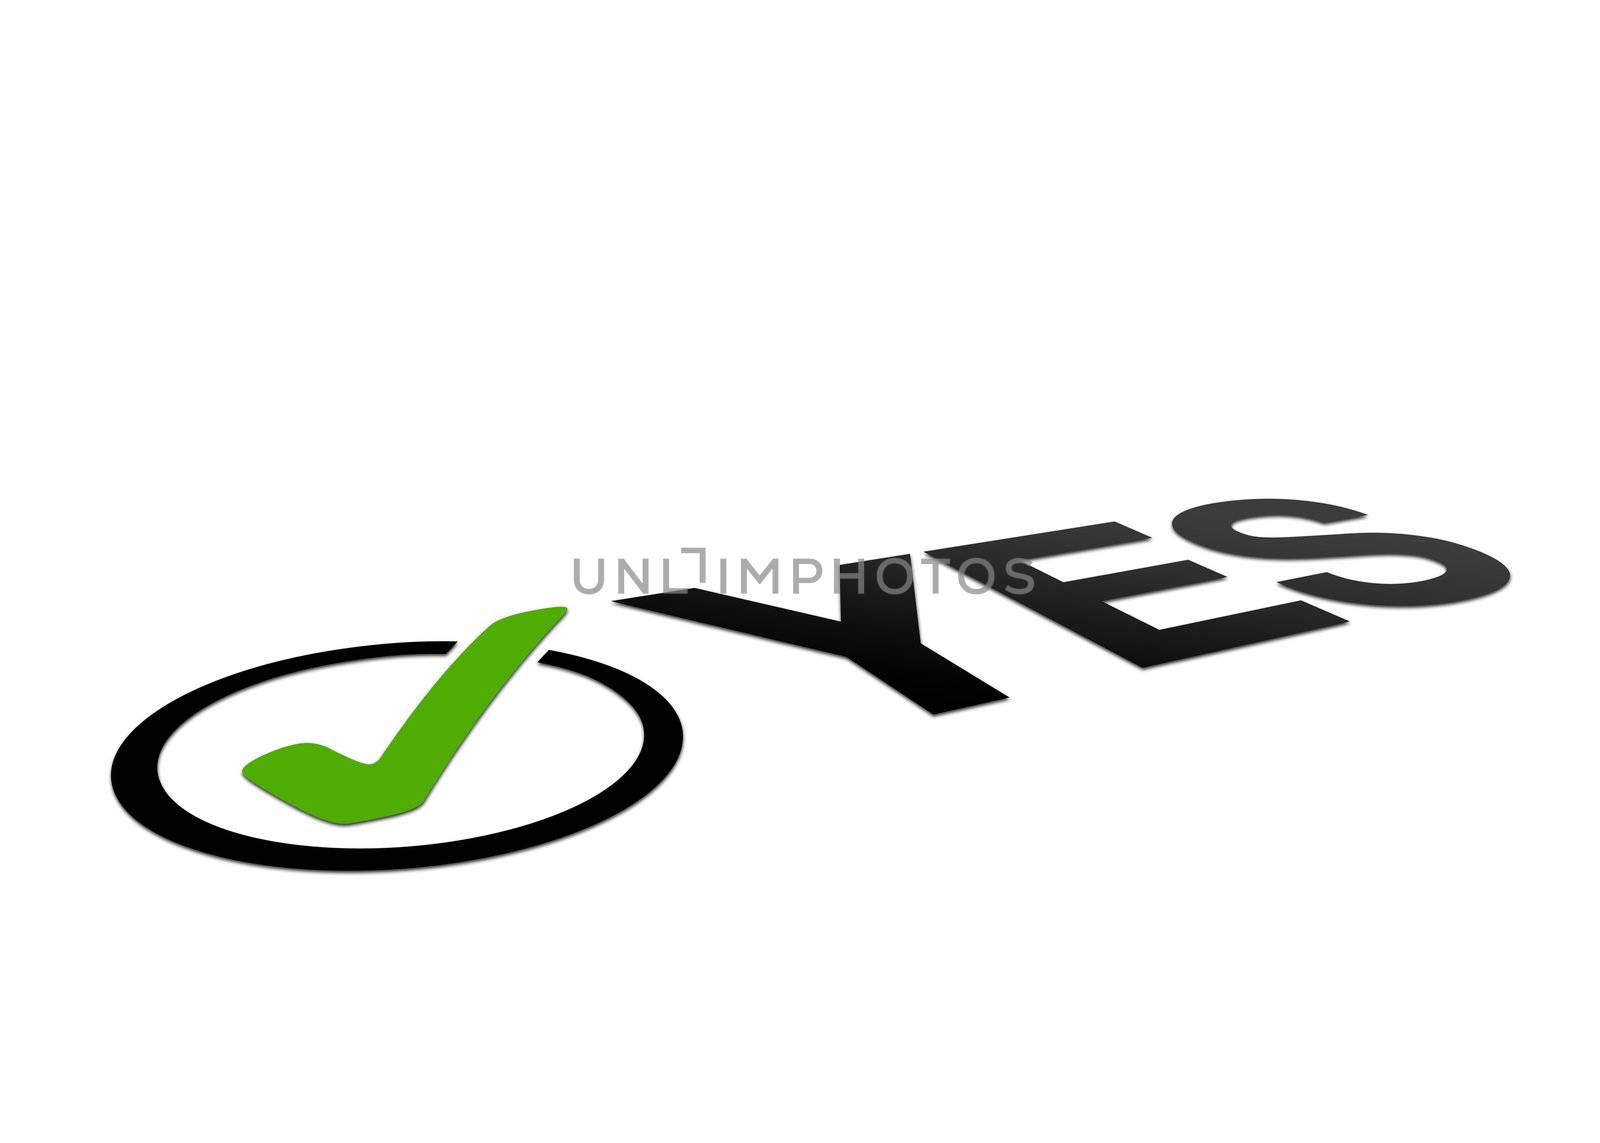 High resolution perspective graphic of the word yes plus checkmark.